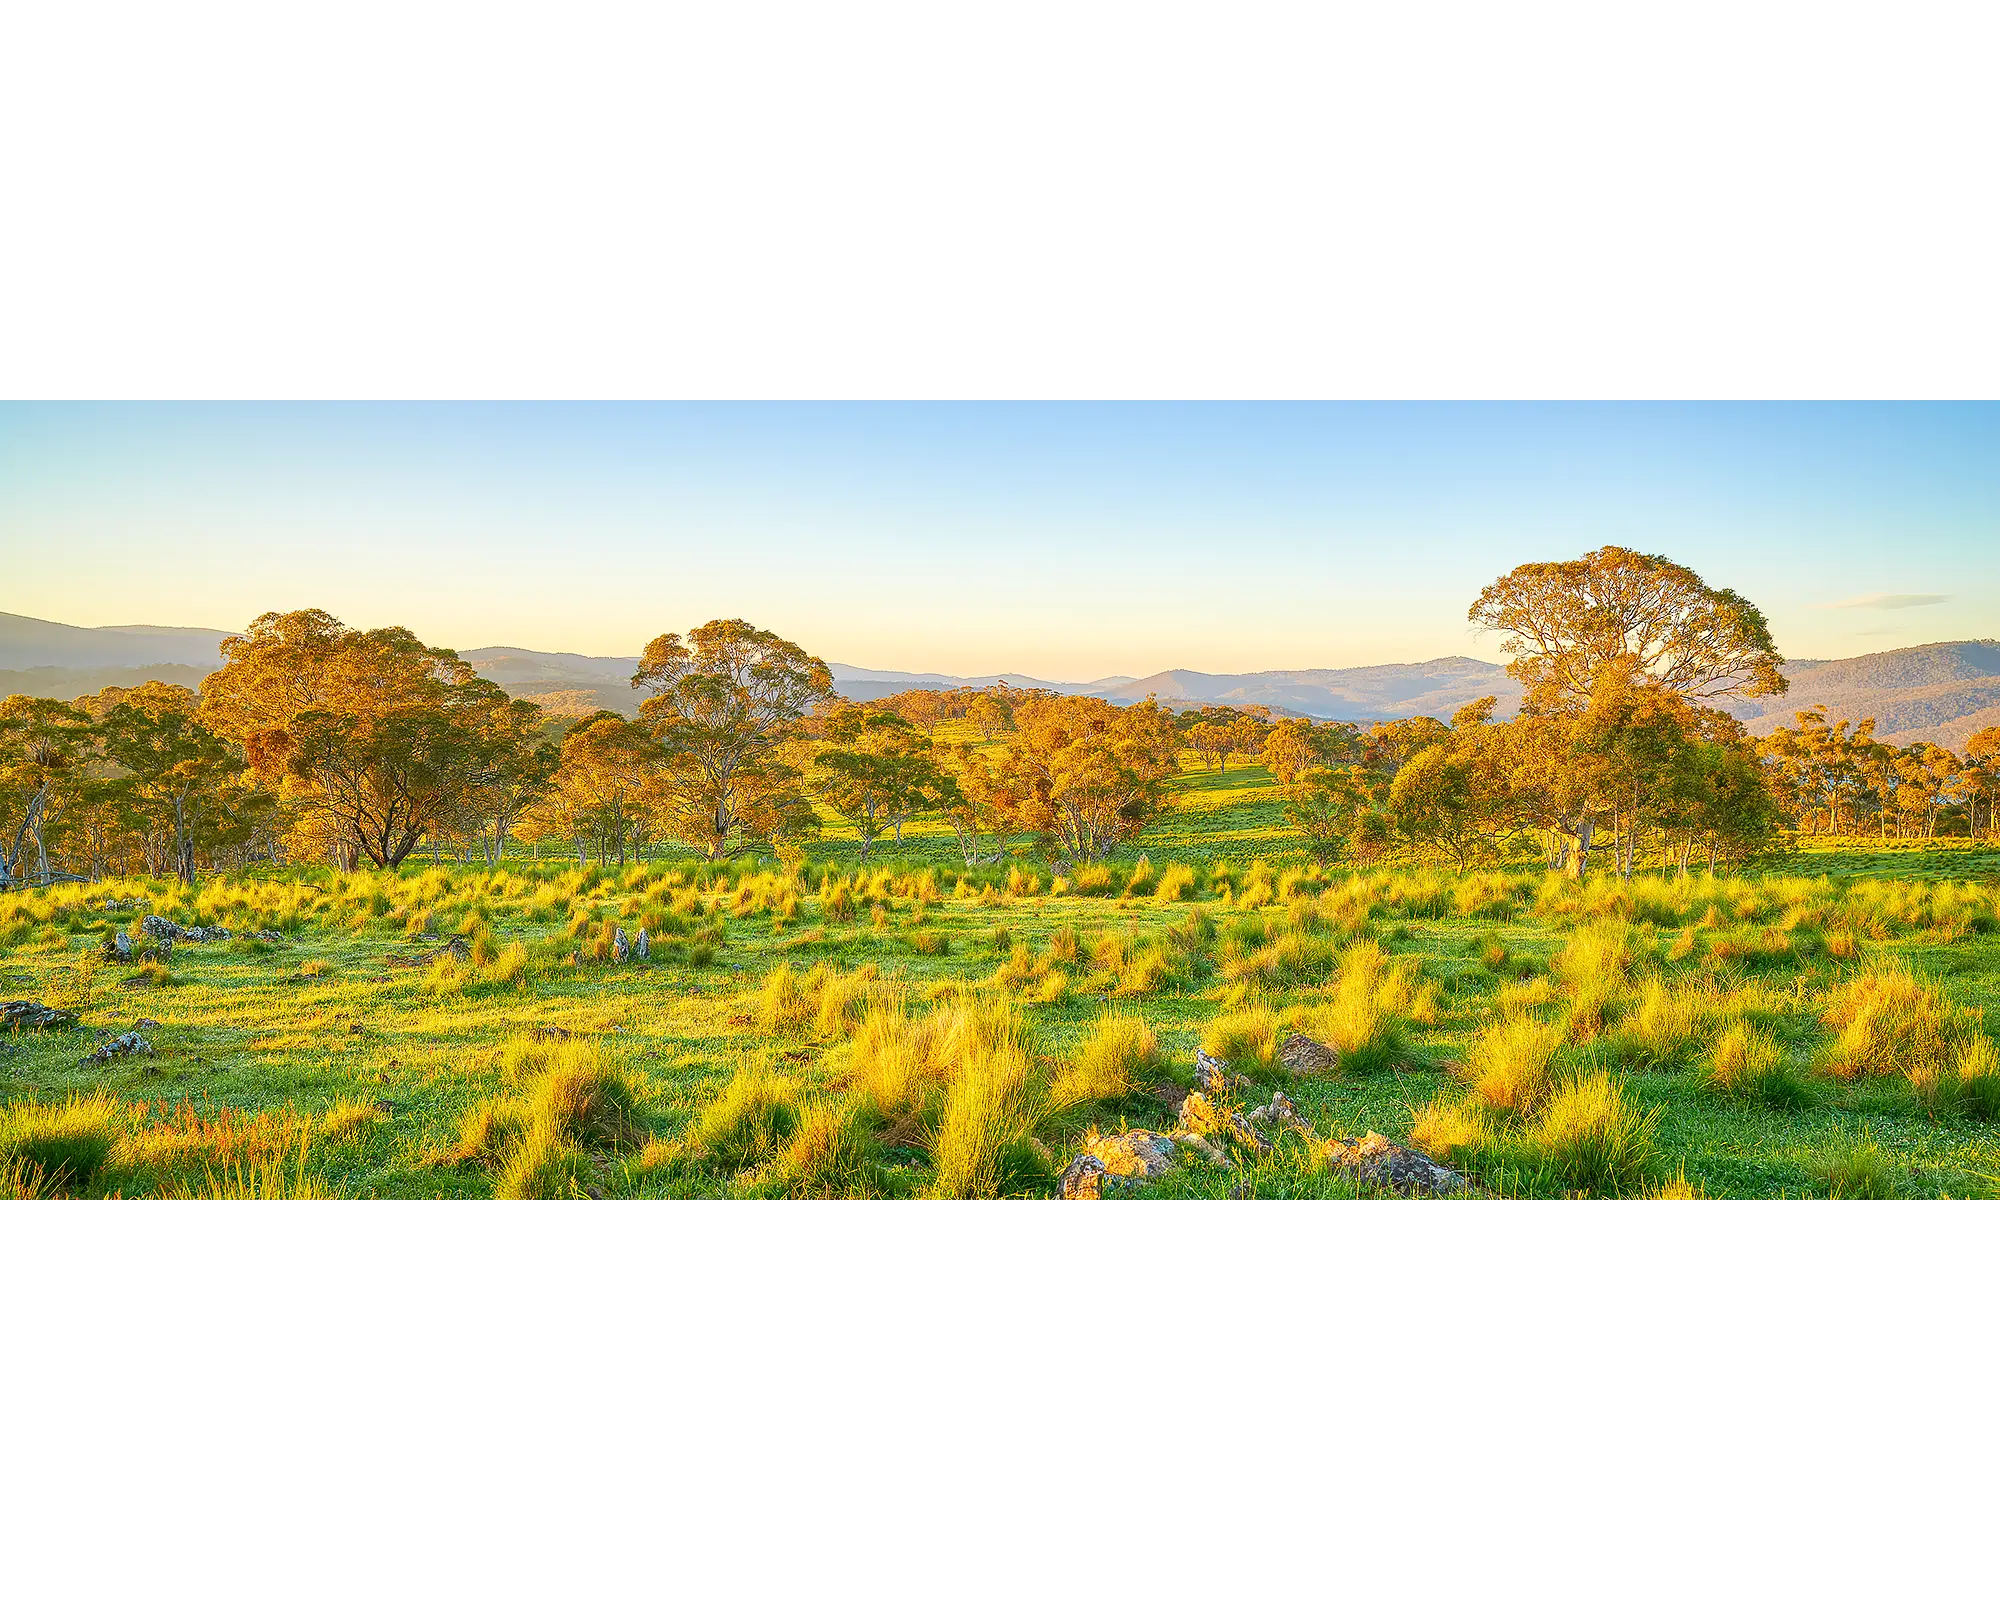 Rural Tranquility - Farm paddock at sunrise, Captains Flat, Southern Tablelands, New South Wales, Australia.